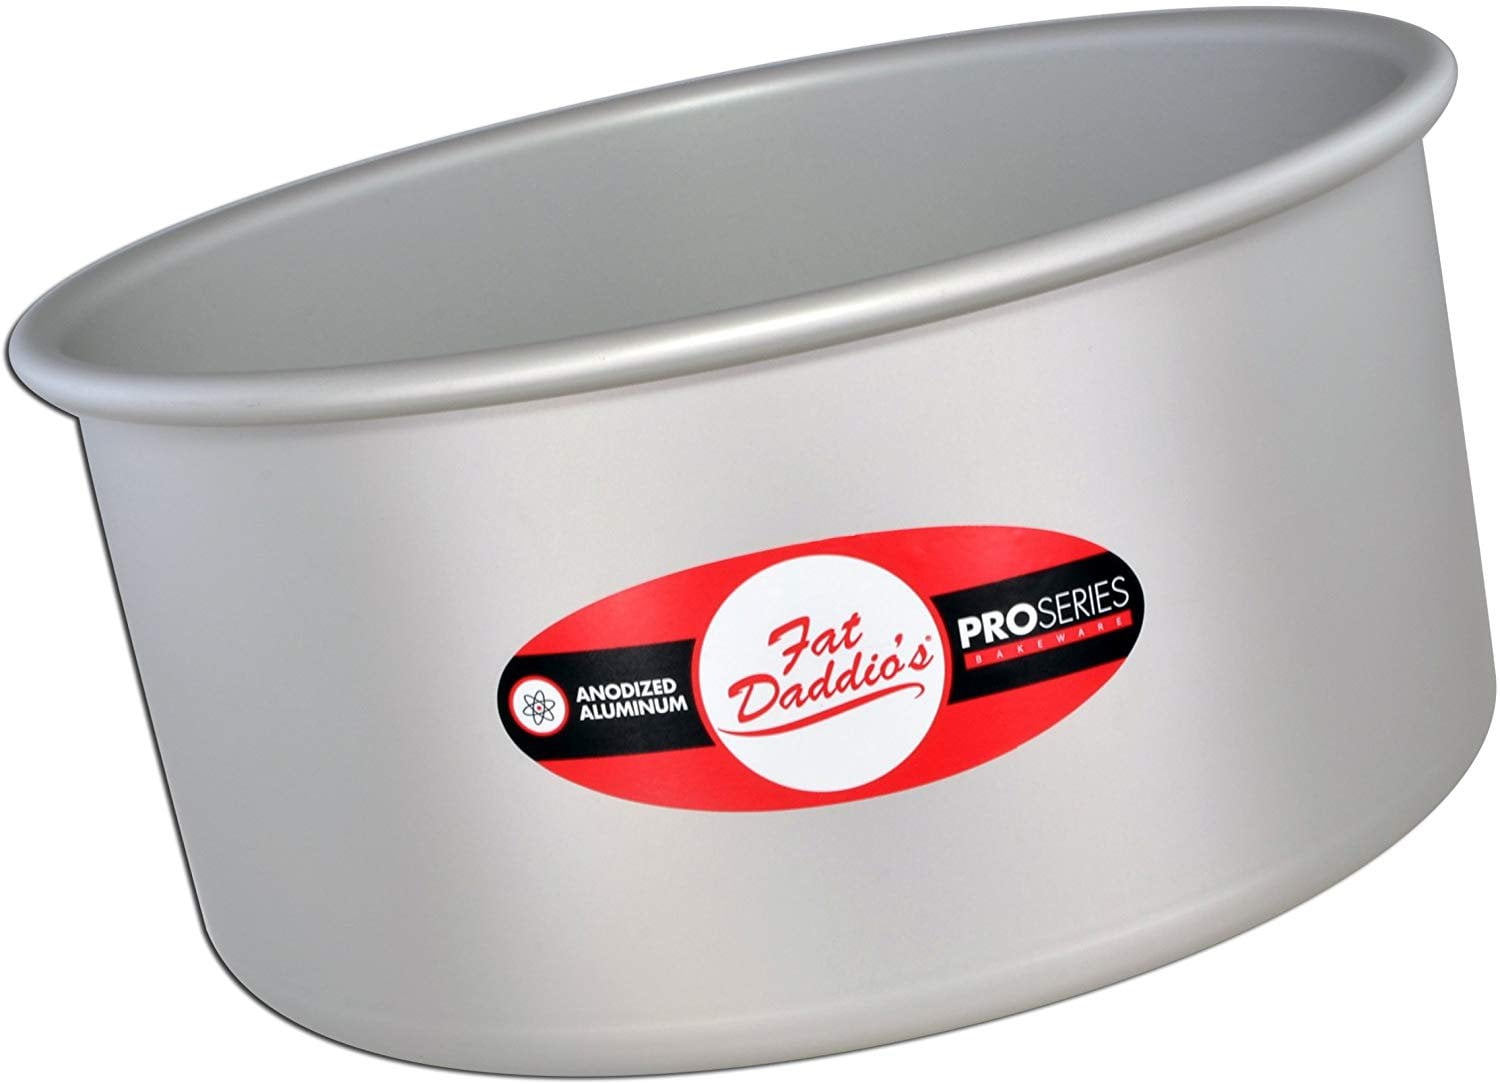 Details about   Fat Daddios PRD-104 Anodized Aluminum Round Cake Pan with Solid Bottom 10 x 4" 